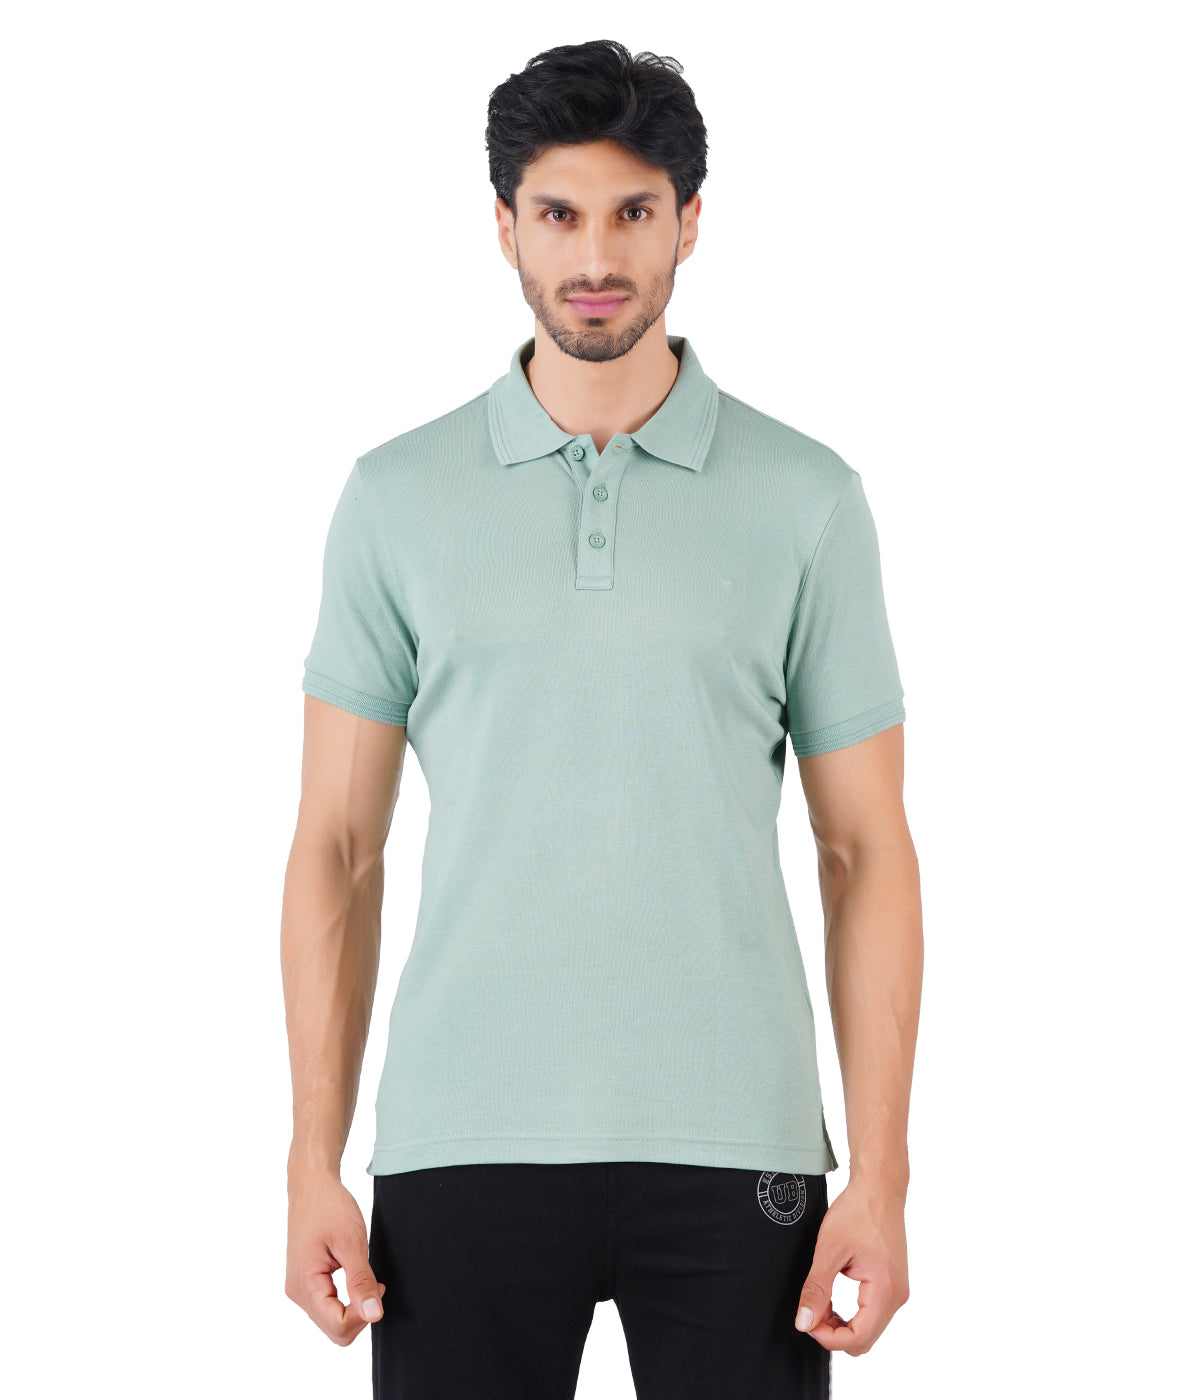 Men's Mint Green Super Combed Cotton Half Sleeves Polo T-Shirt